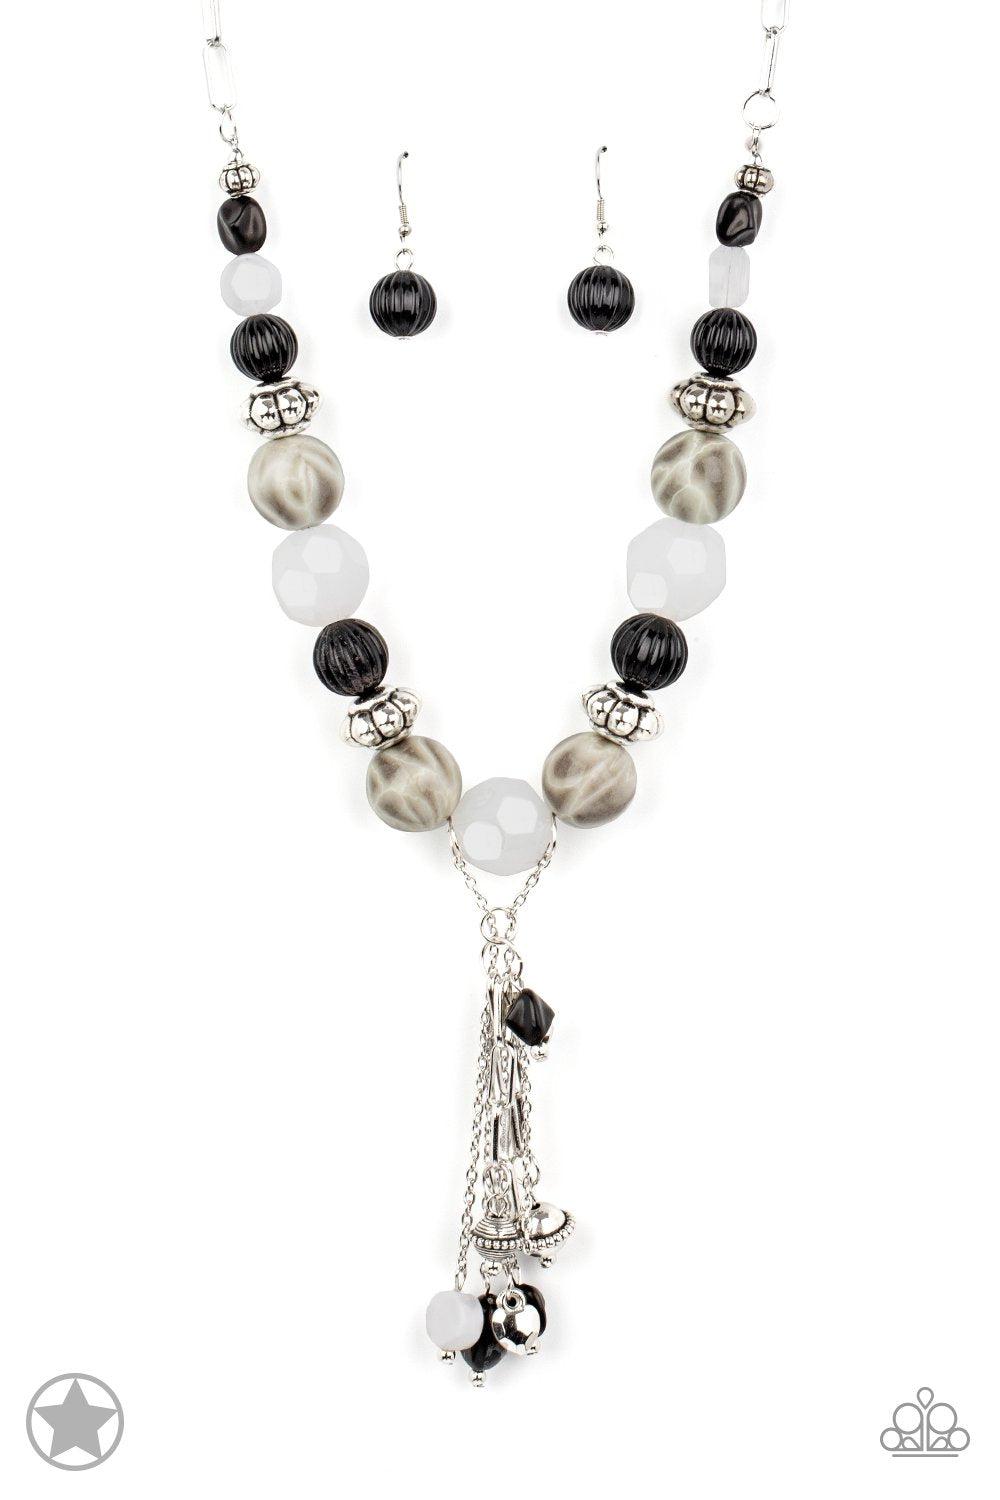 Break a Leg - Black and White Necklace and matching Earrings - Paparazzi Accessories - lightbox -CarasShop.com - $5 Jewelry by Cara Jewels